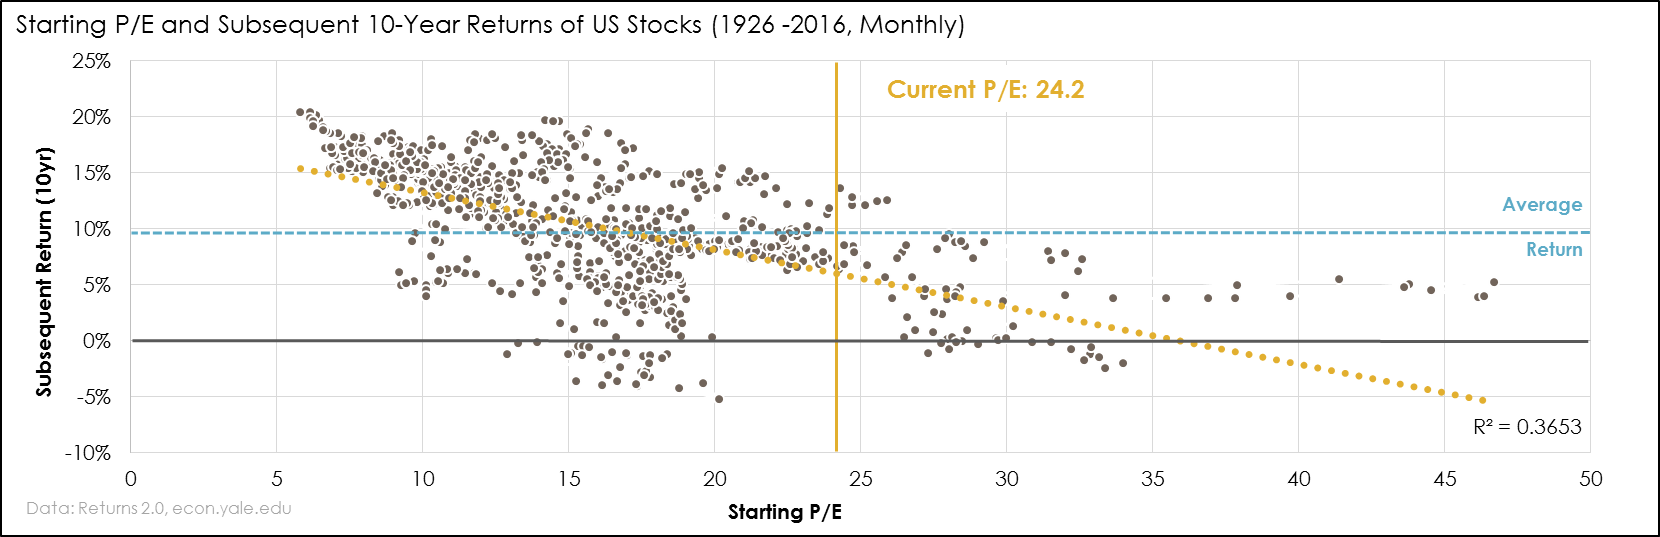 starting p/e and subsequent 10 year return